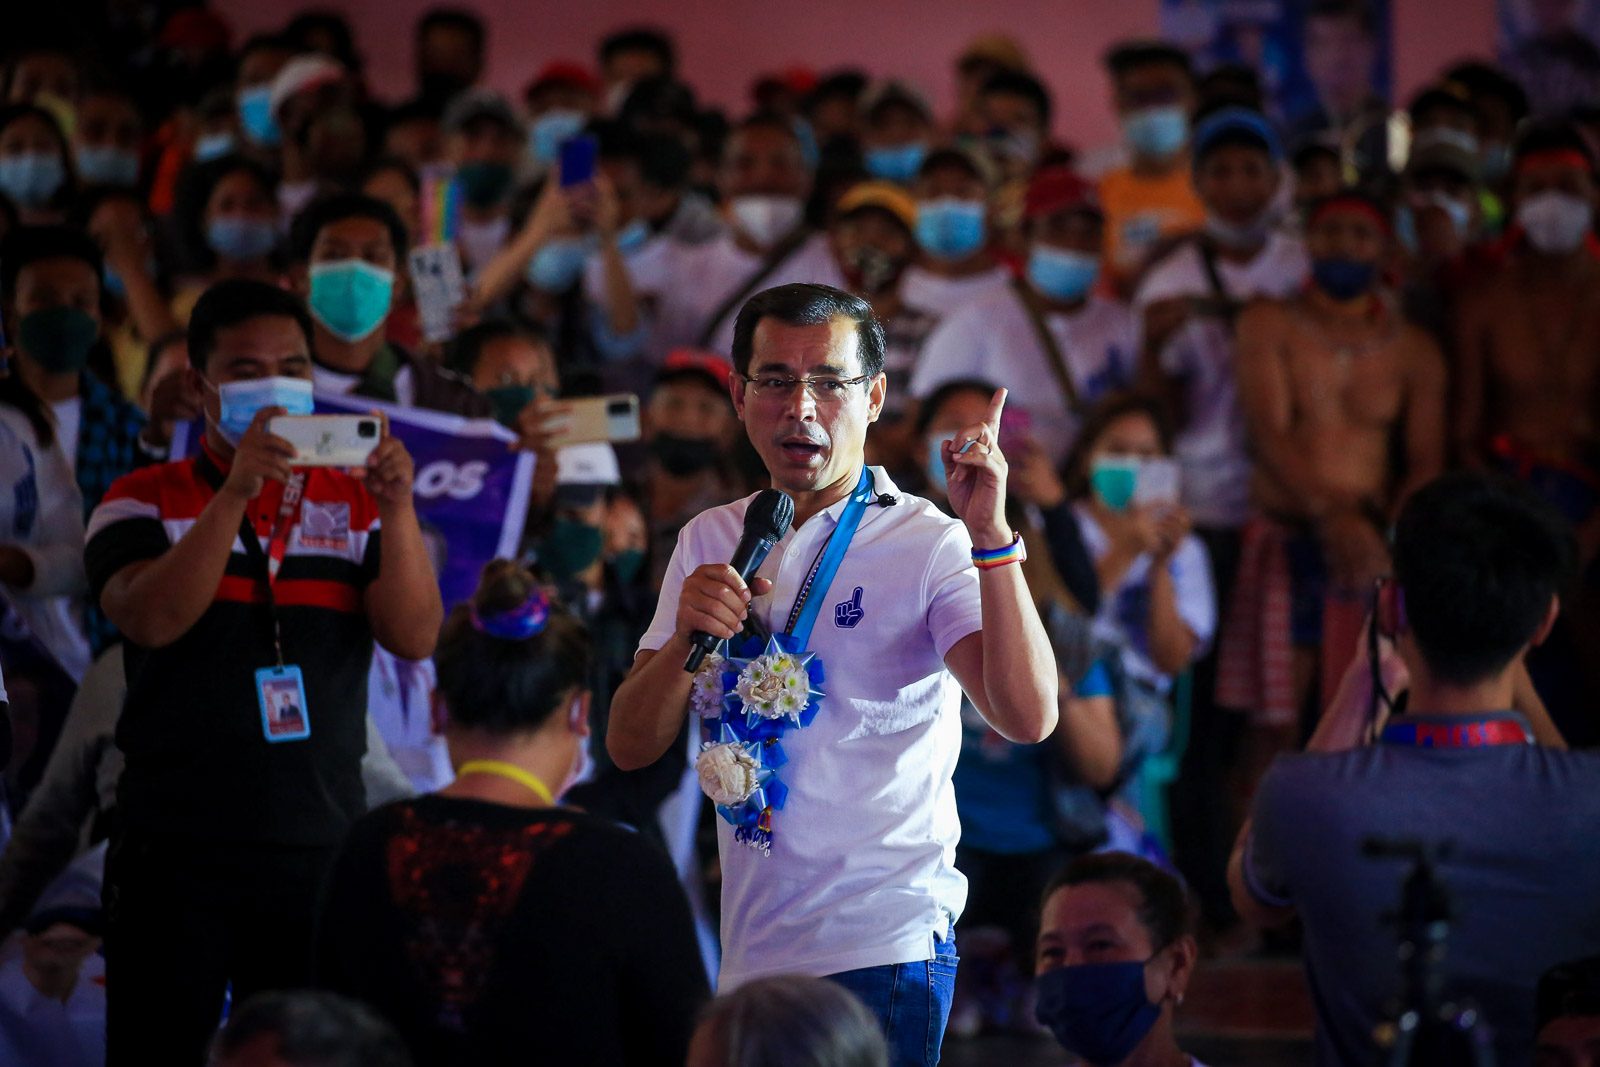 Isko Moreno: Wrong to use church as venue for campaign rallies